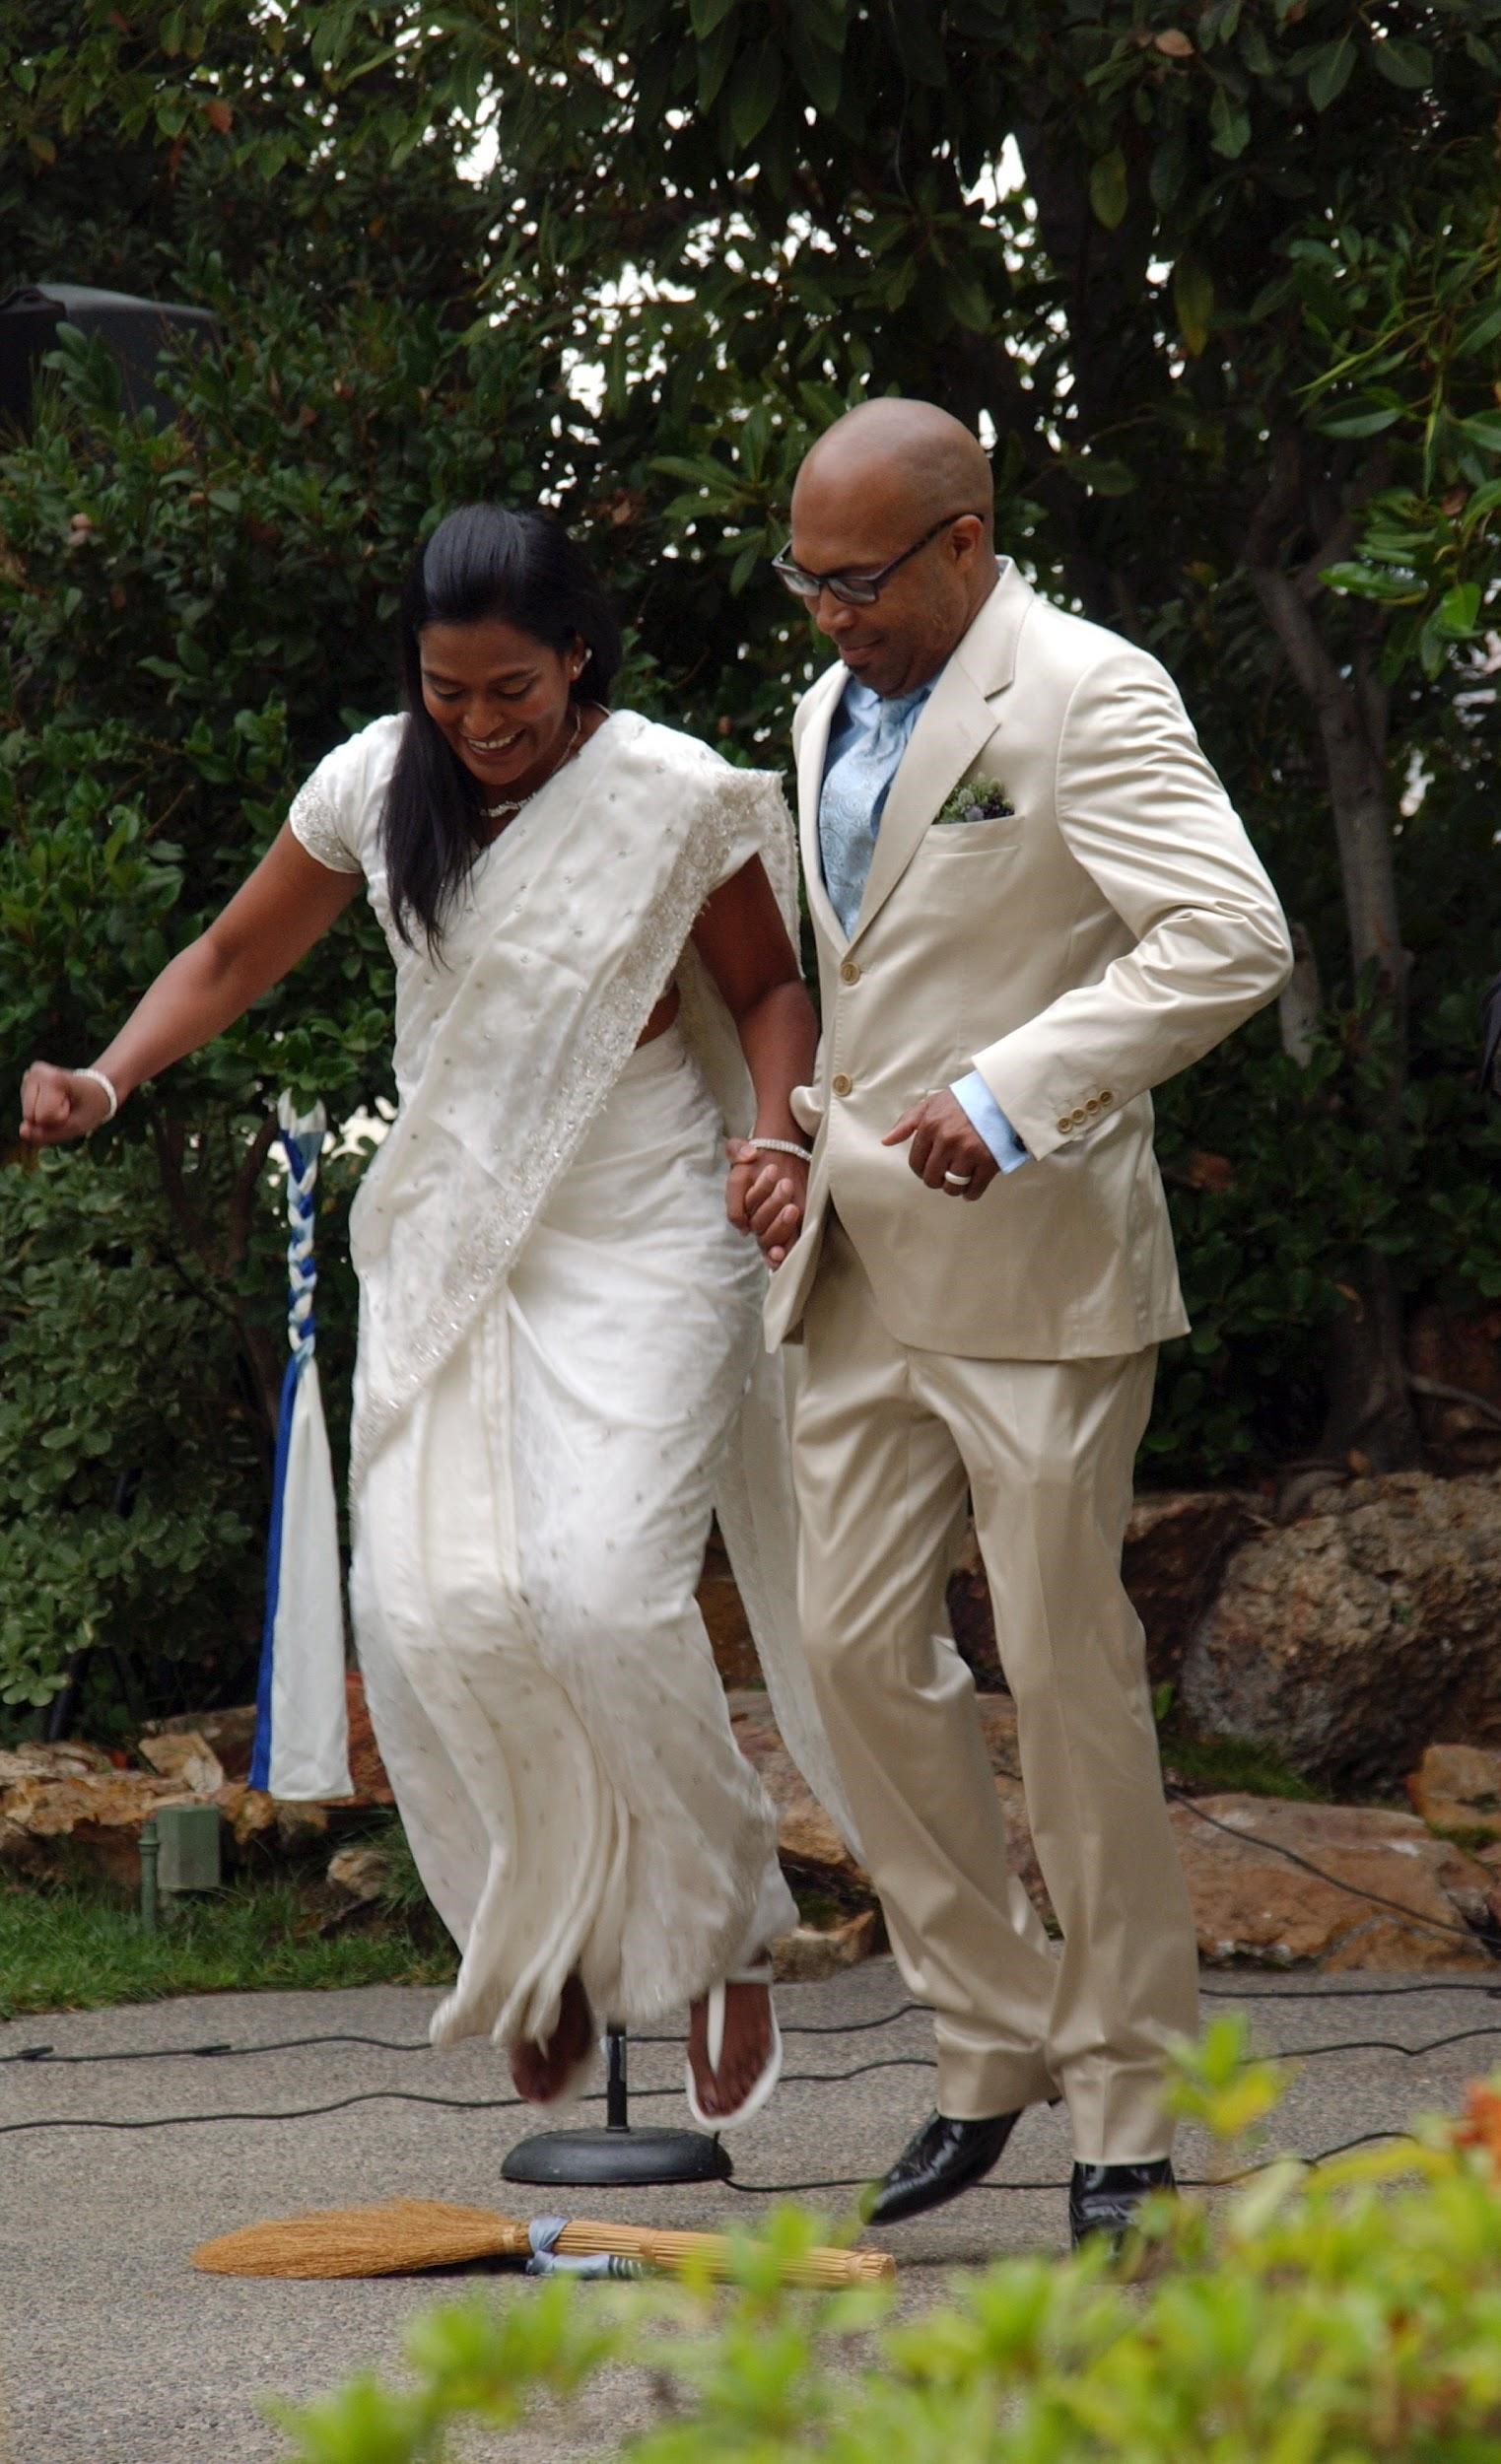 Geneses Mayes Jumping the Broom with her husband.